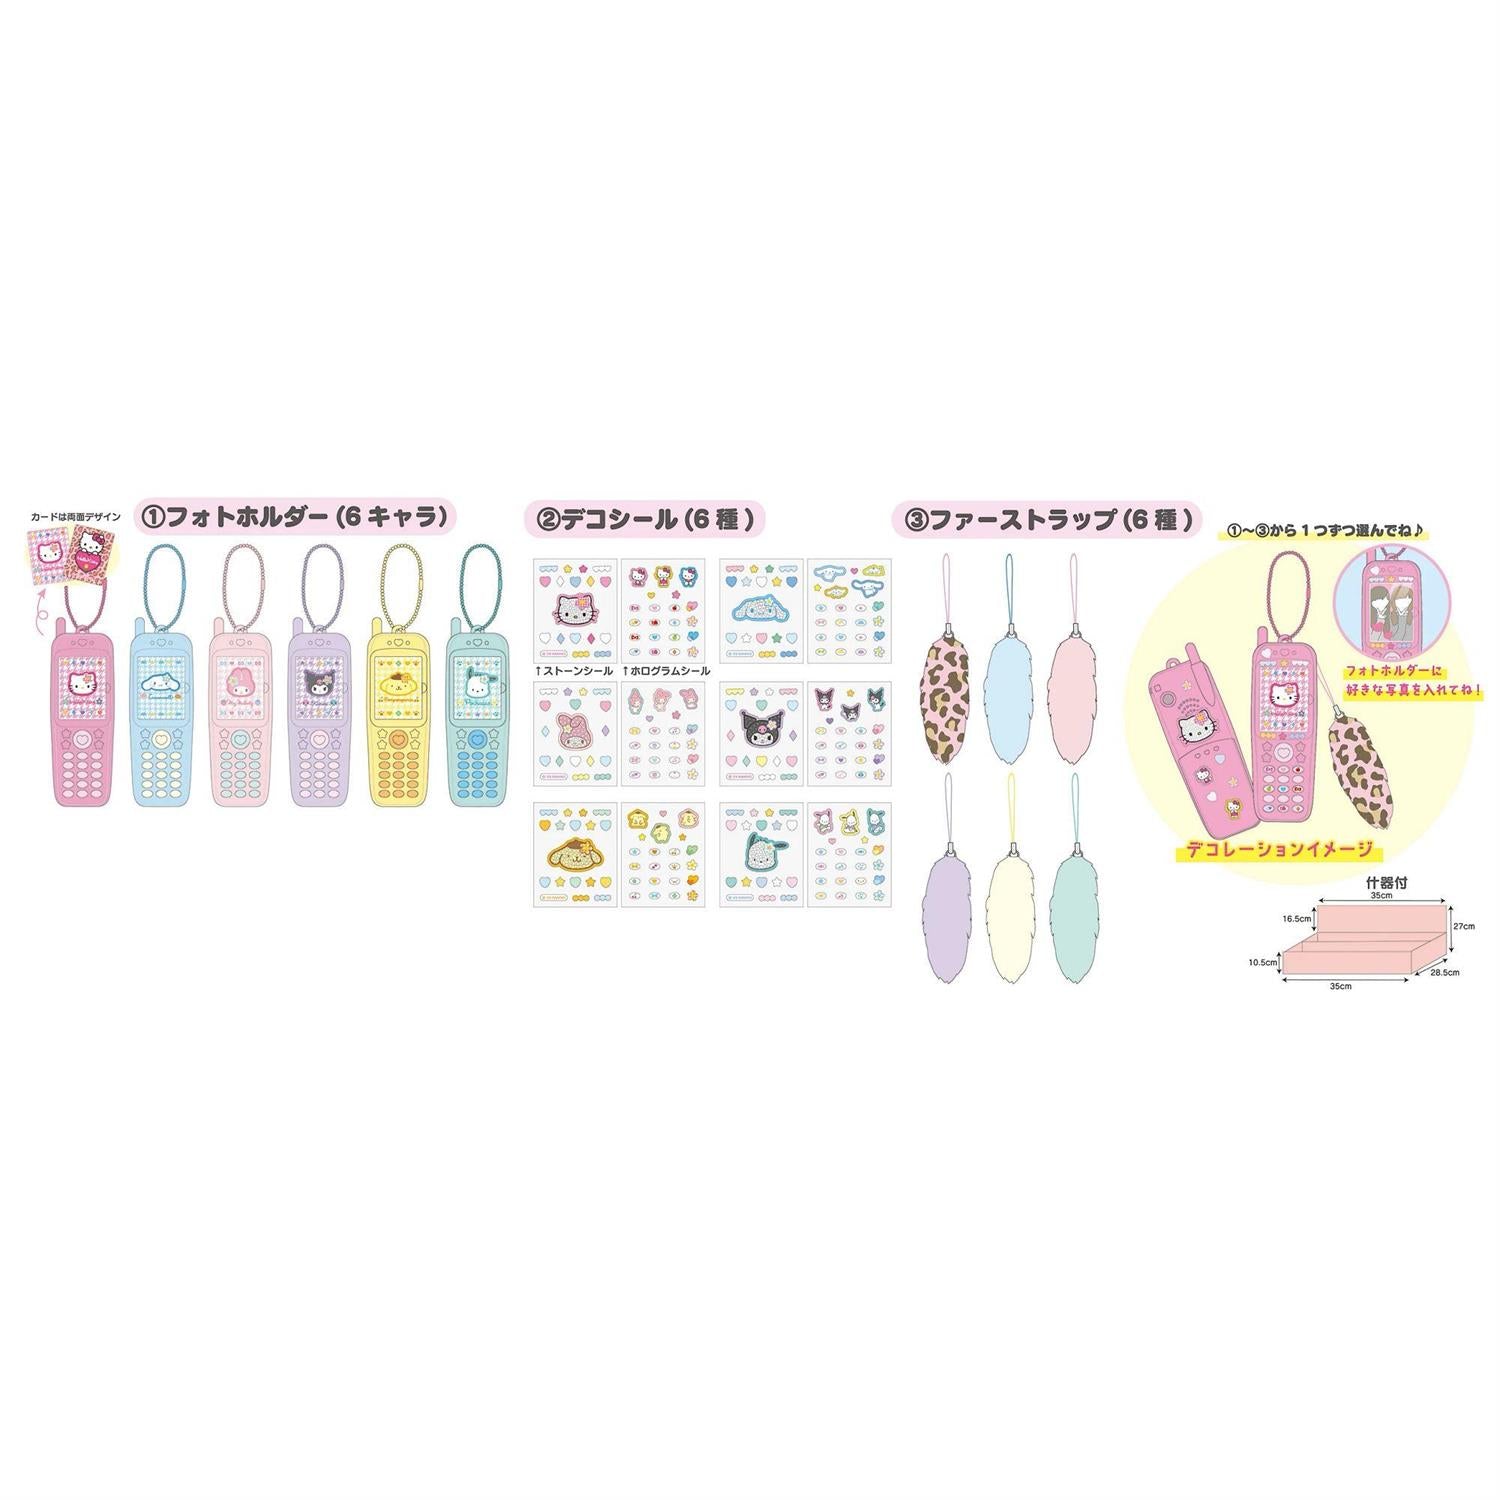 Sanrio Characters Pack Yourself Cellphone Keychain Blind Box